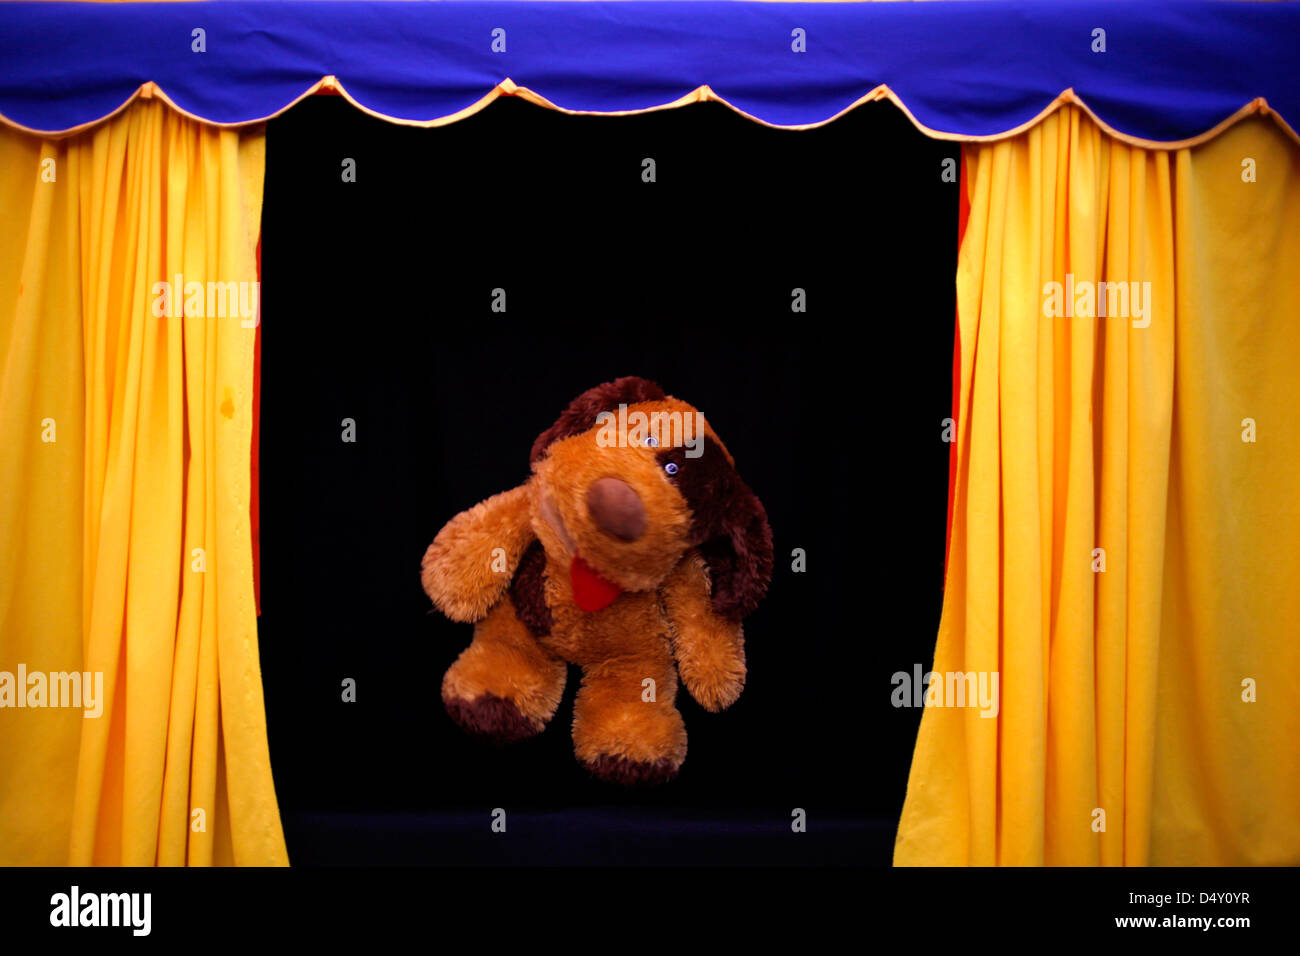 Puppet Show Stage Images – Browse 1,682 Stock Photos, Vectors, and Video